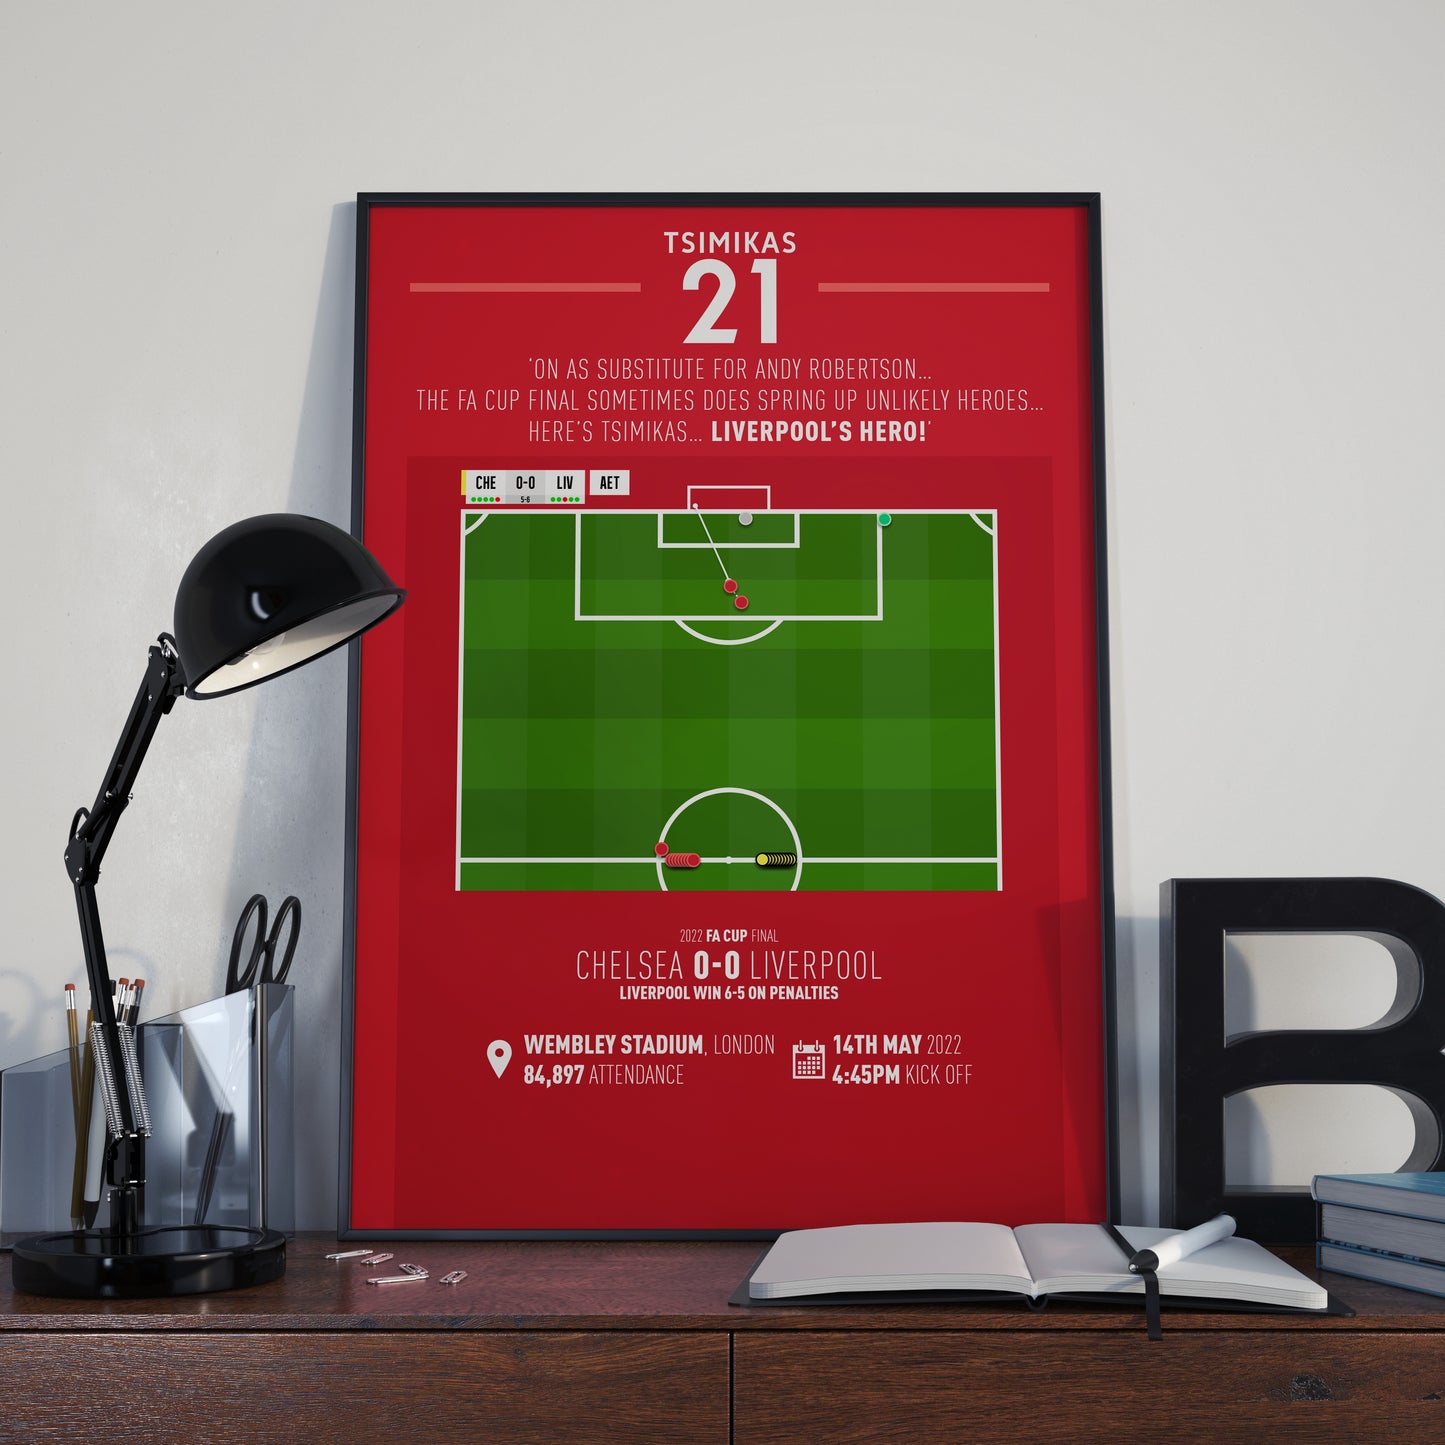 Kostas Tsimikas | Winning Penalty In Cup Final (CHE 0-0 LIV) Goal Print | Poster